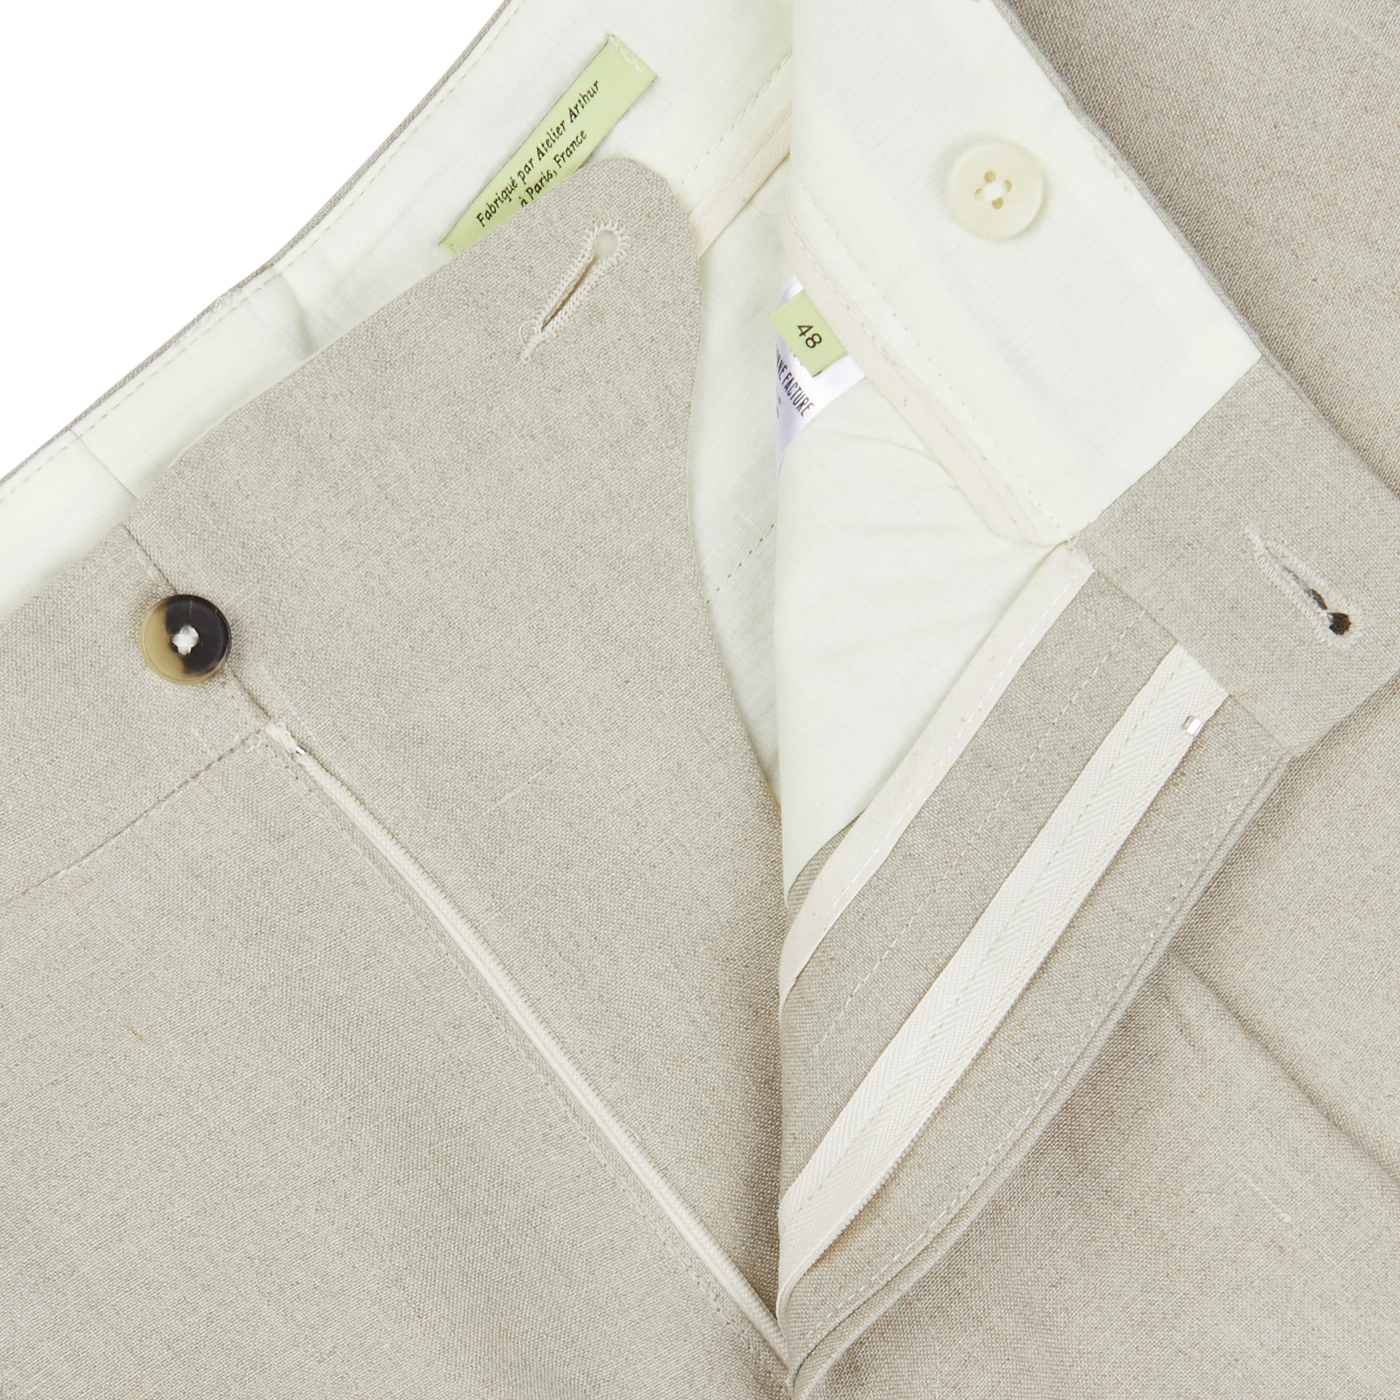 Close-up view of a contemporary fit oatmeal beige linen pleated trousers from De Bonne Facture with a button-up front, visible size tag, and collar details.